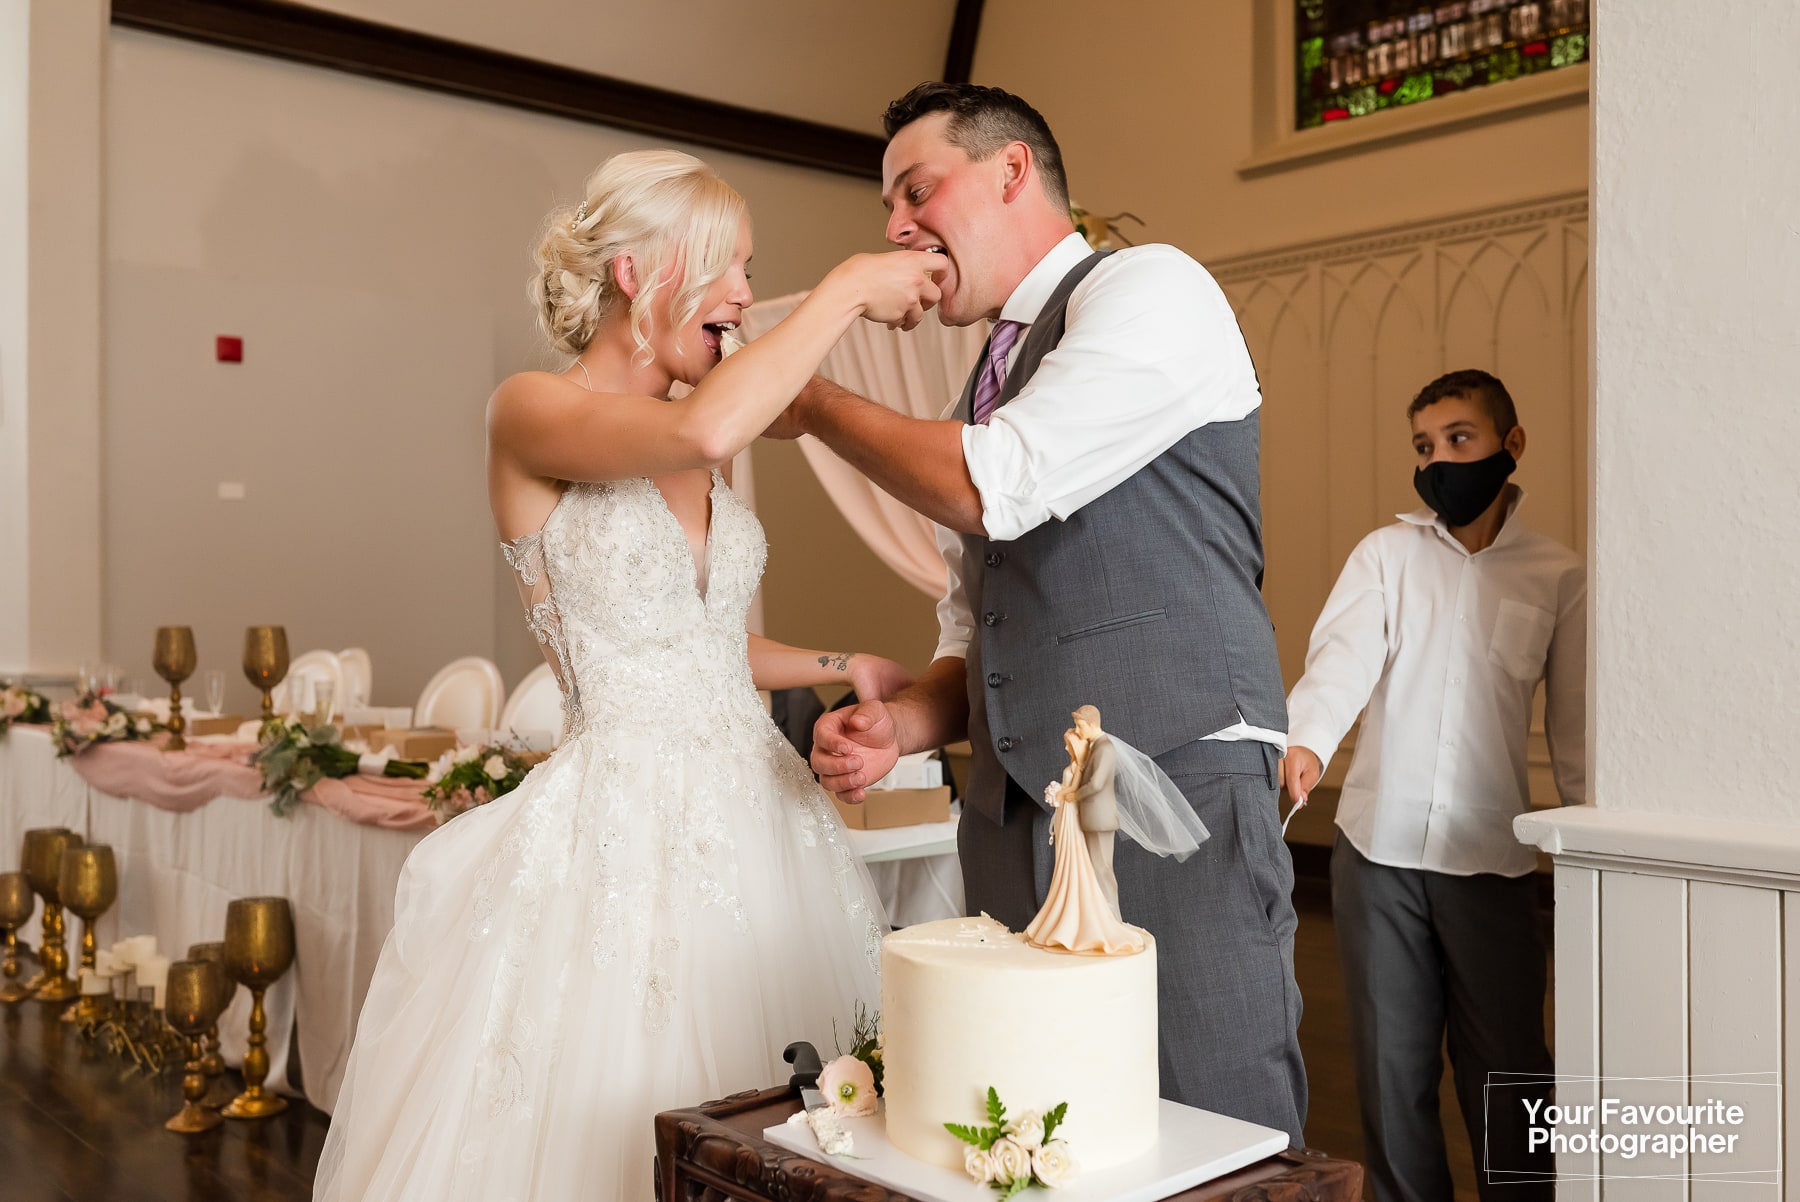 Bride and groom cake cutting